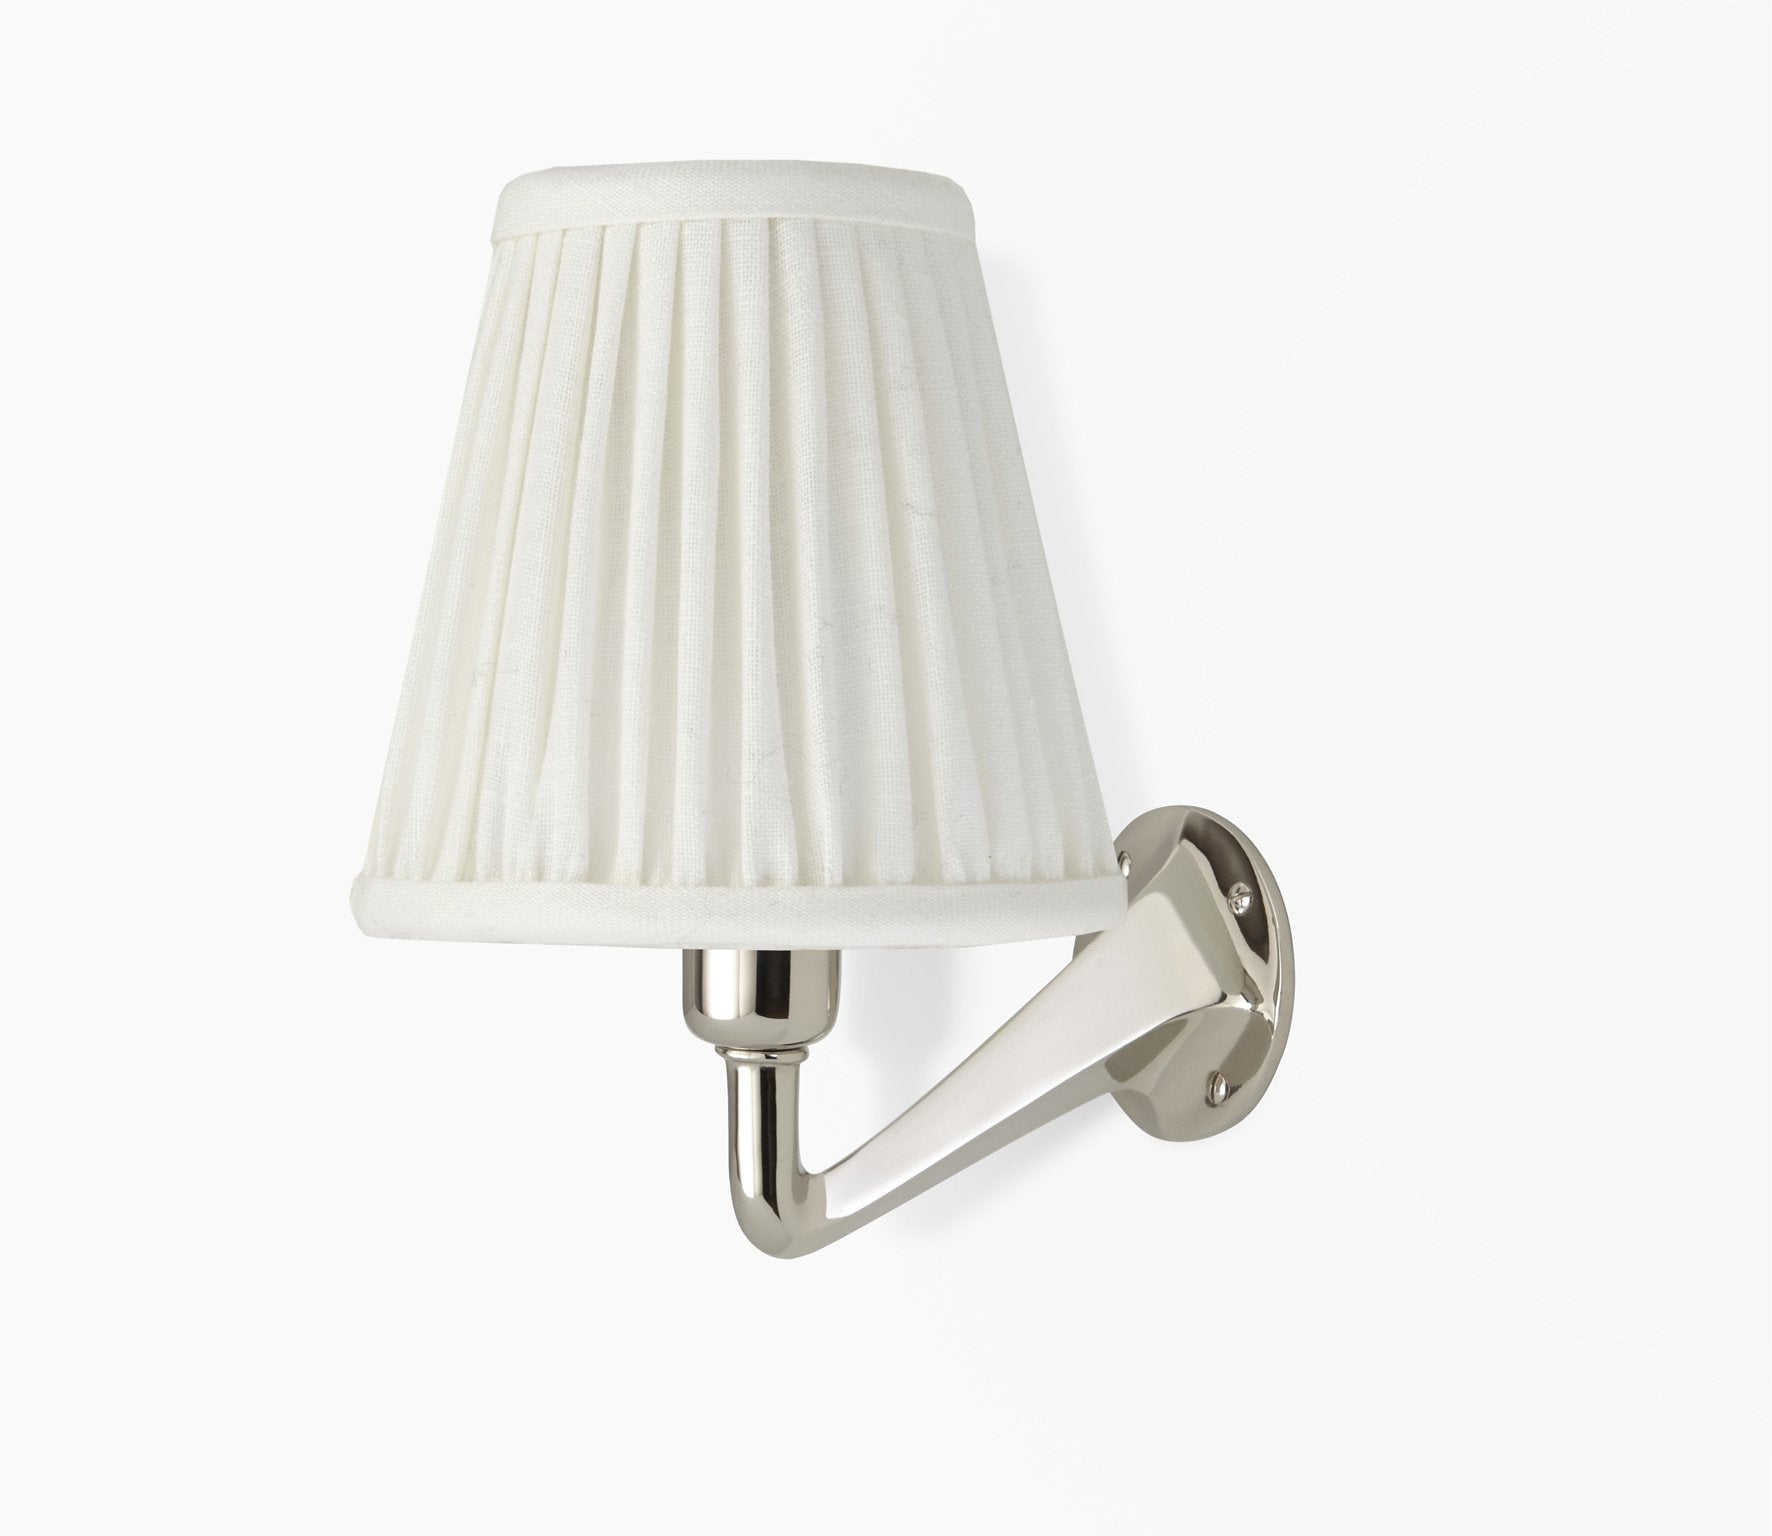 Leila Wall Light with Gathered Empire Shade Product Image 1